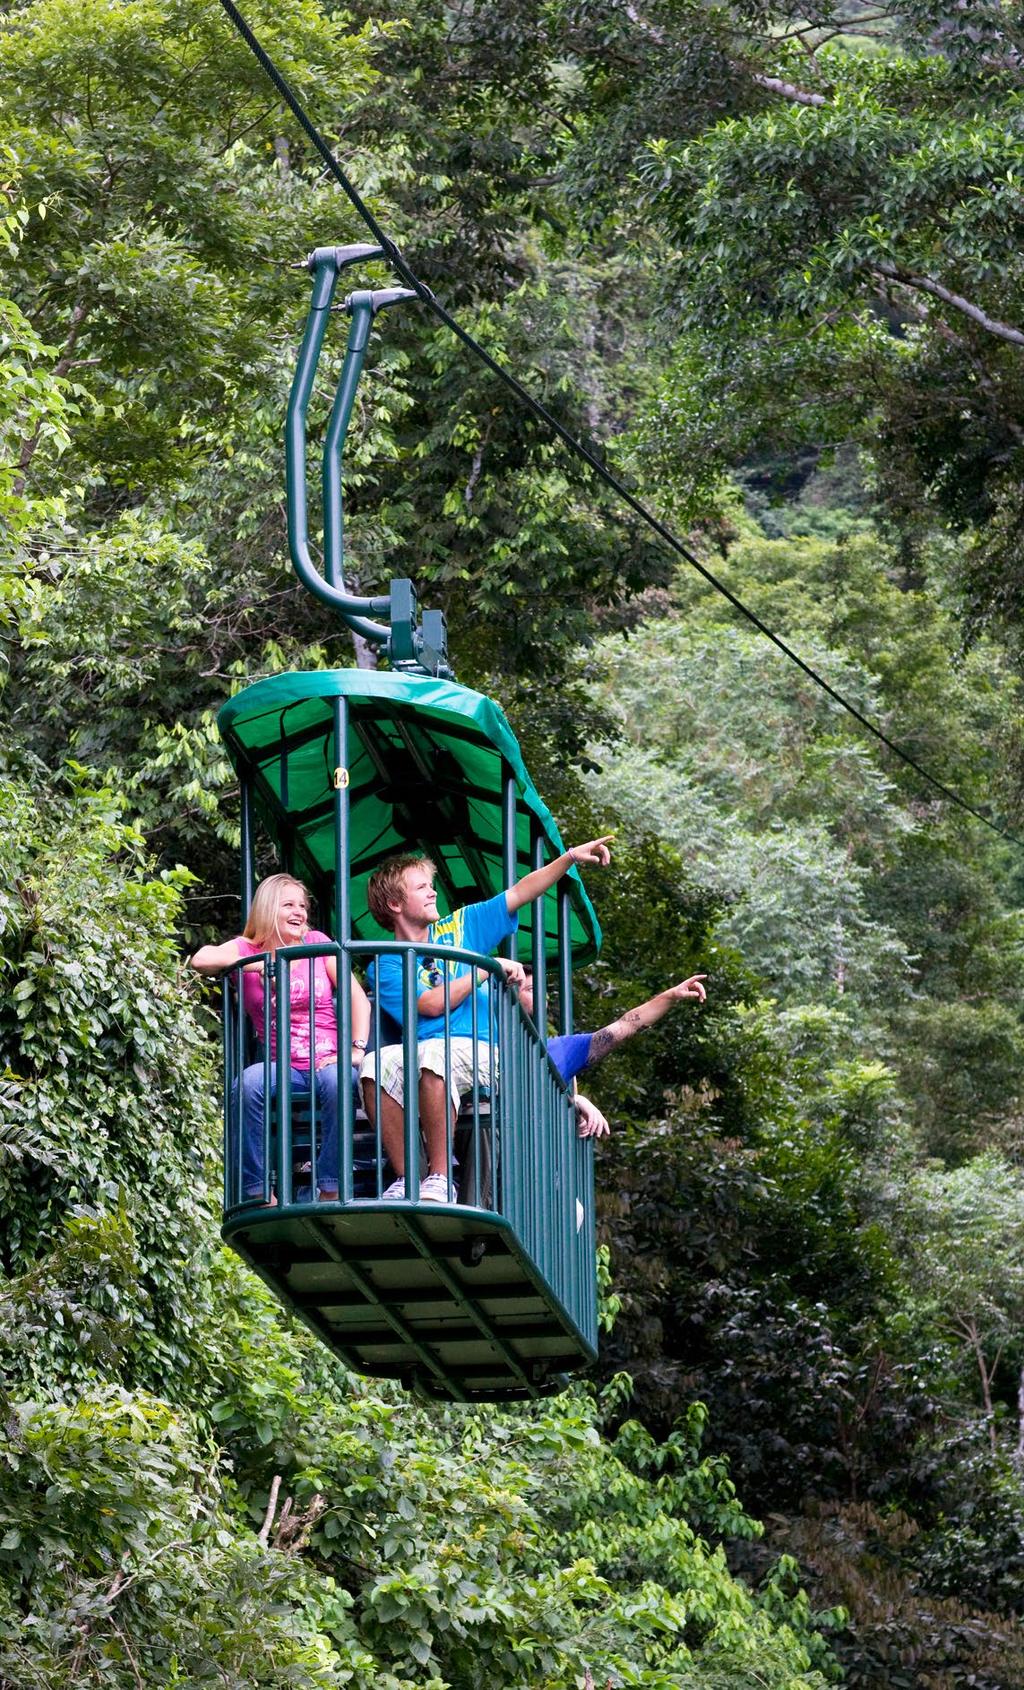 The Authentic Rainforest Experience Aerial Tram or Zip Lines, Hike & Jungle Safari Boat Drive to Sarapiqui area through the extraordinary rainforest of Braulio Carrillo National Park.